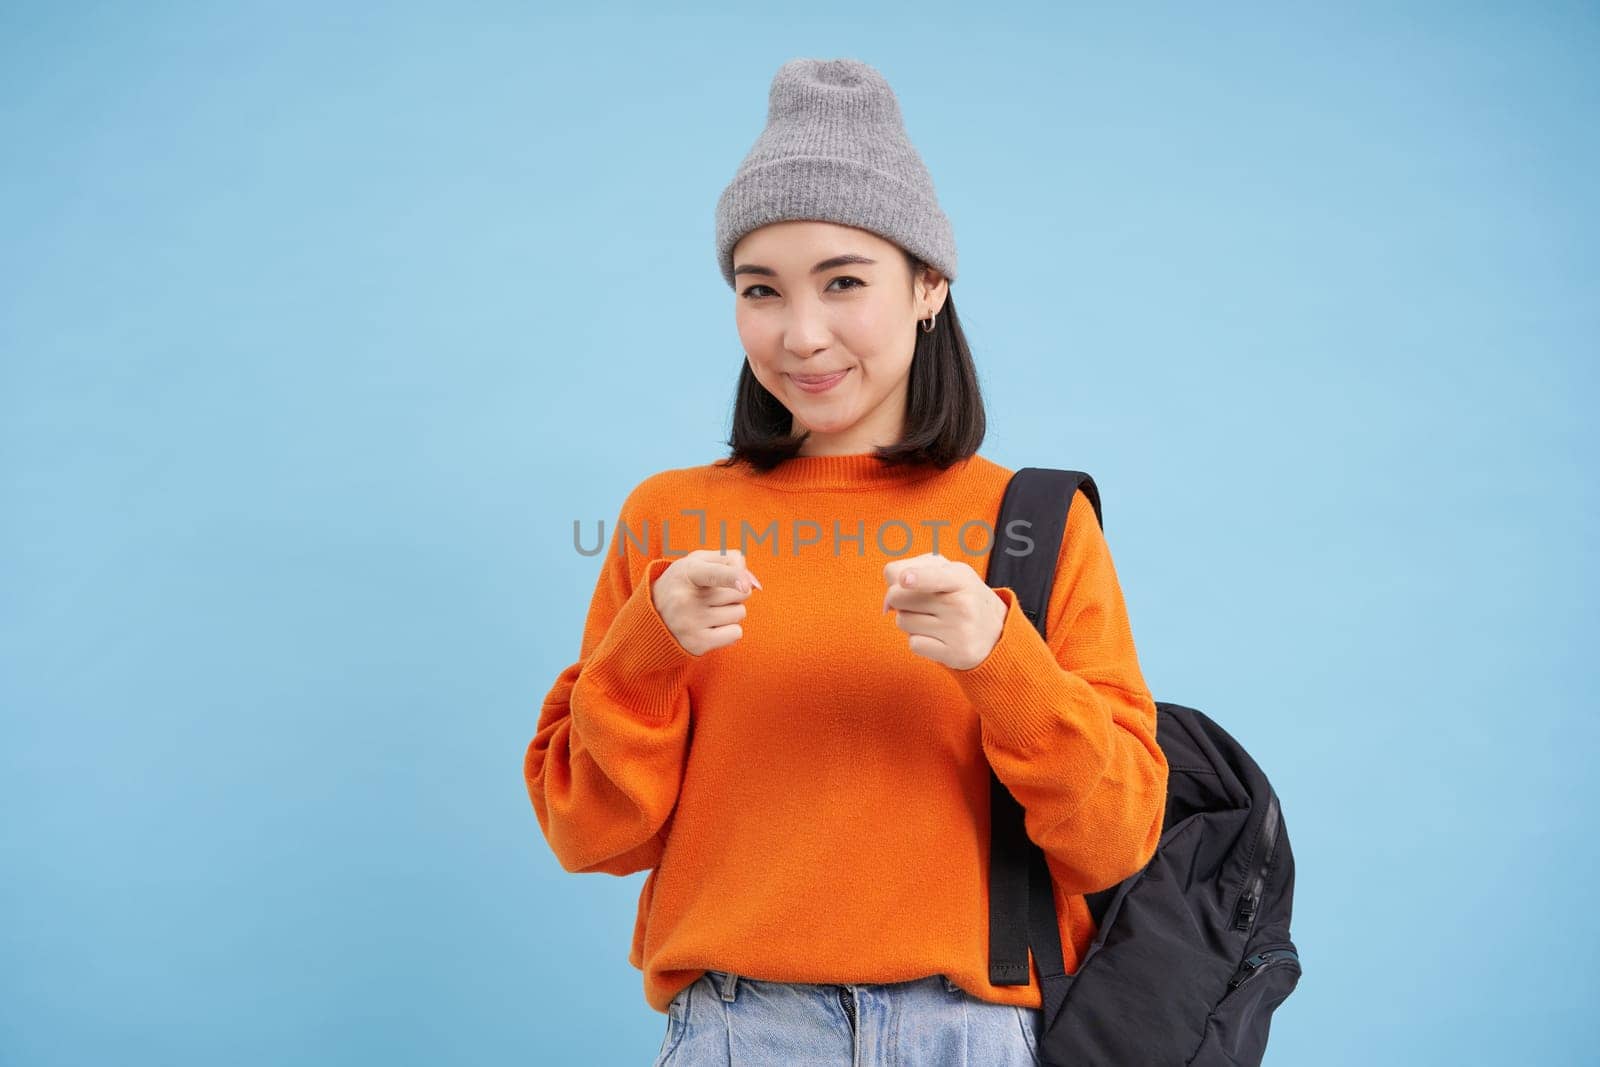 Cute korean woman in hat with backpack, student pointing fingers at camera, inviting you, congratulating, standing over blue background.